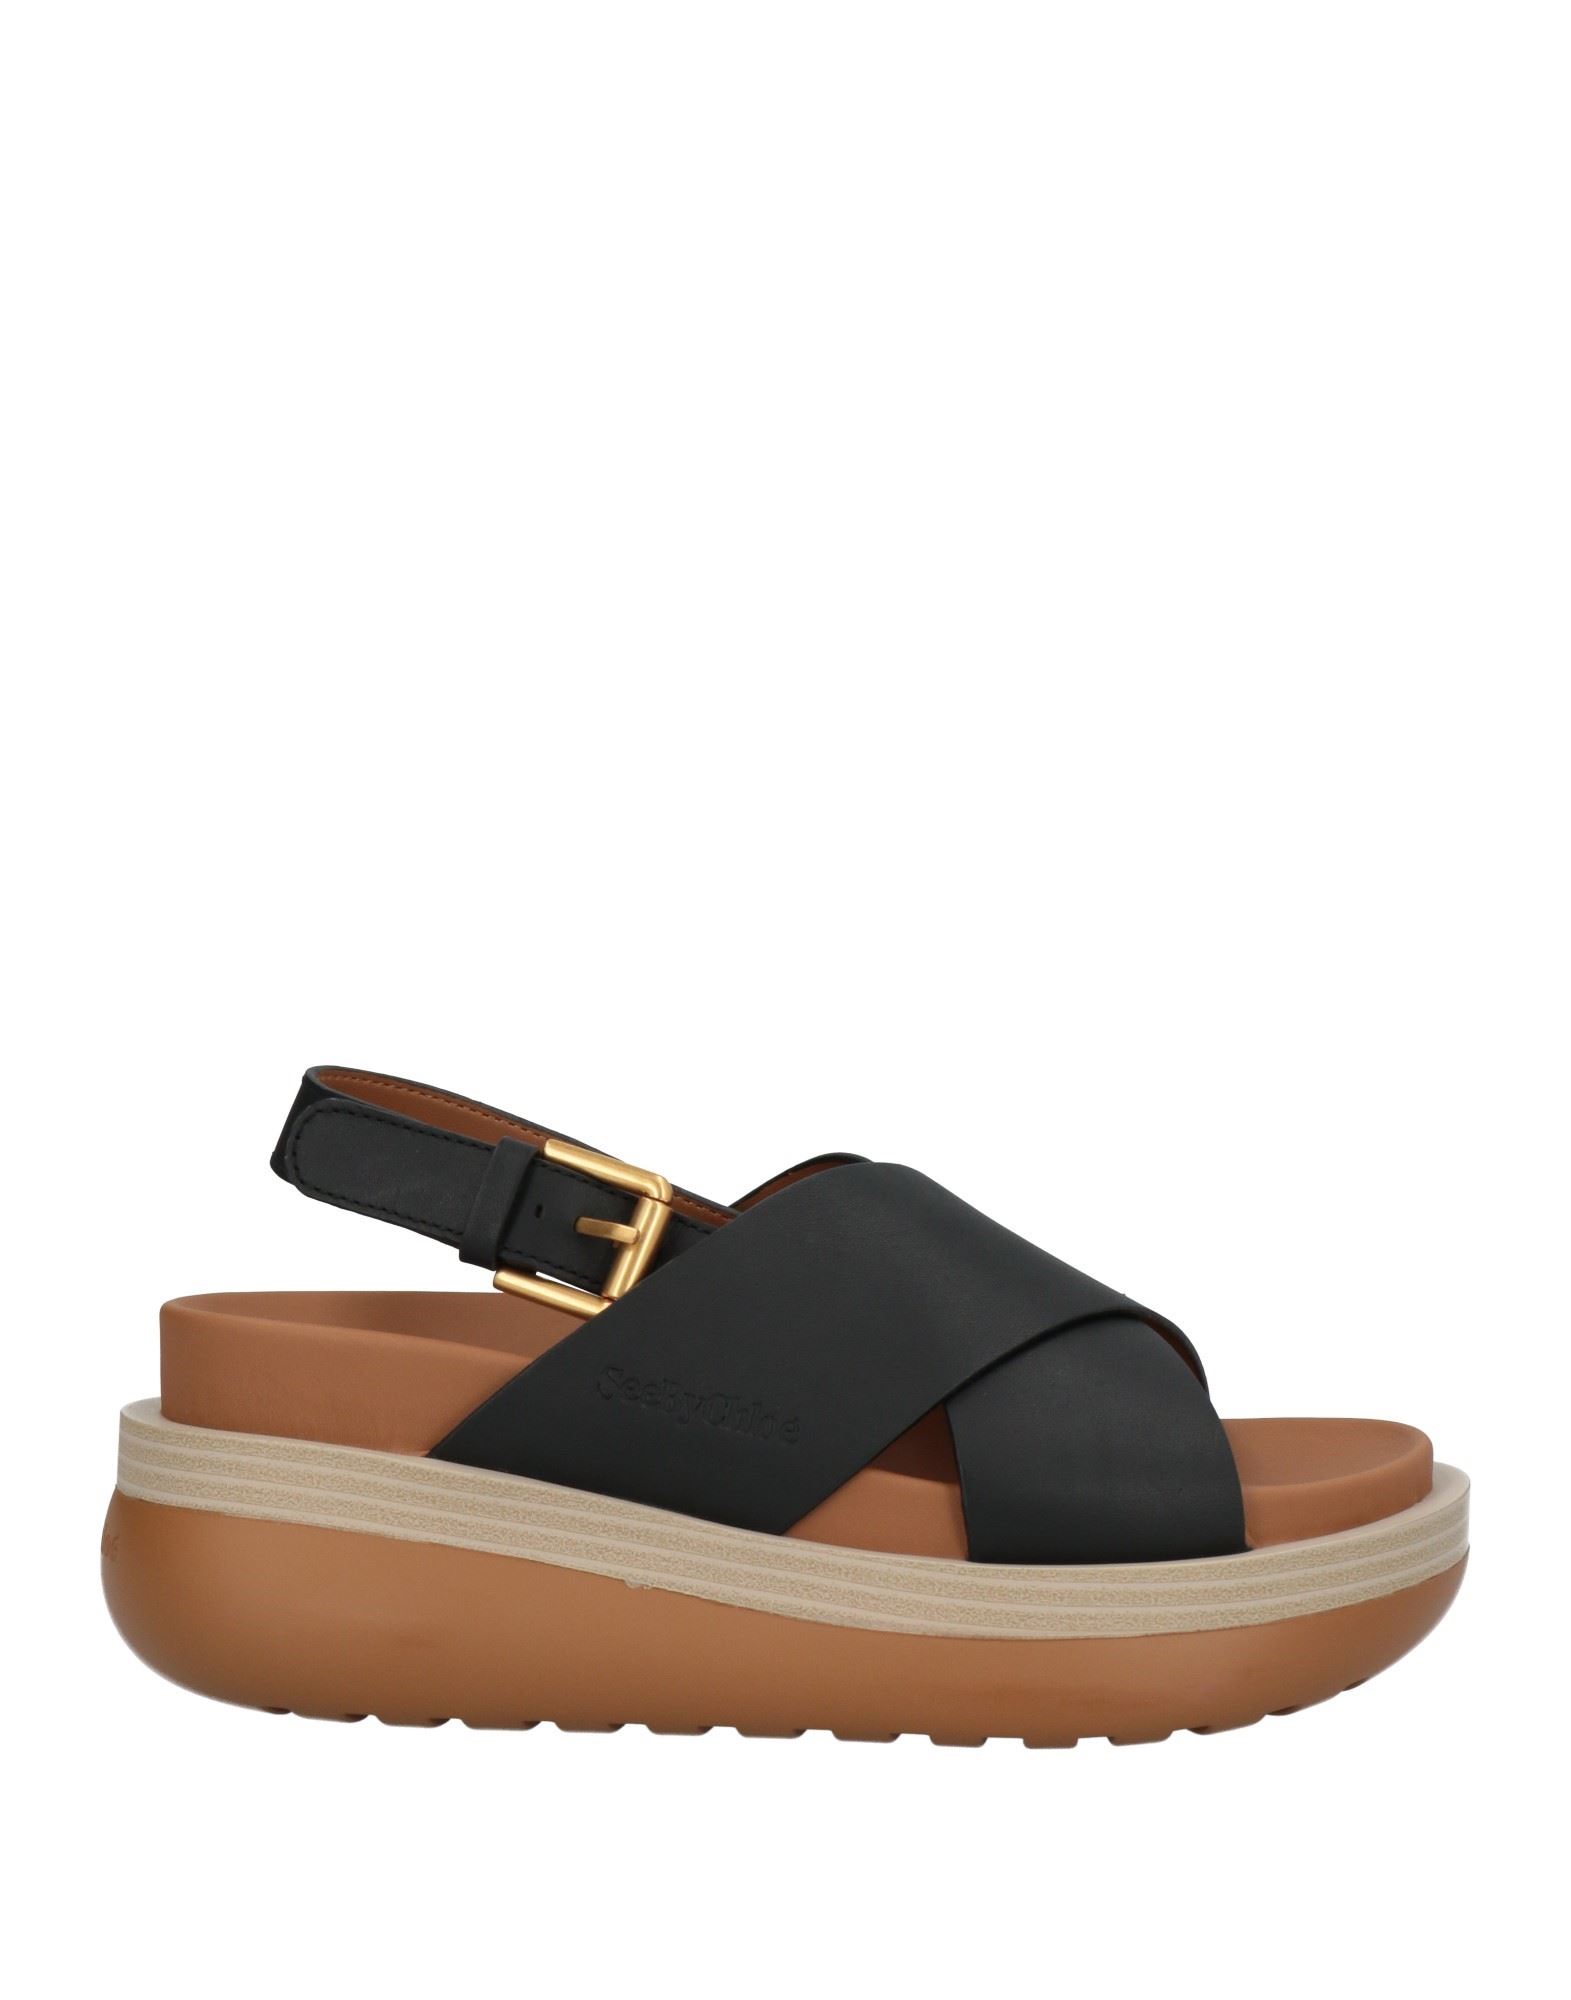 See By Chloé Sandals In Black